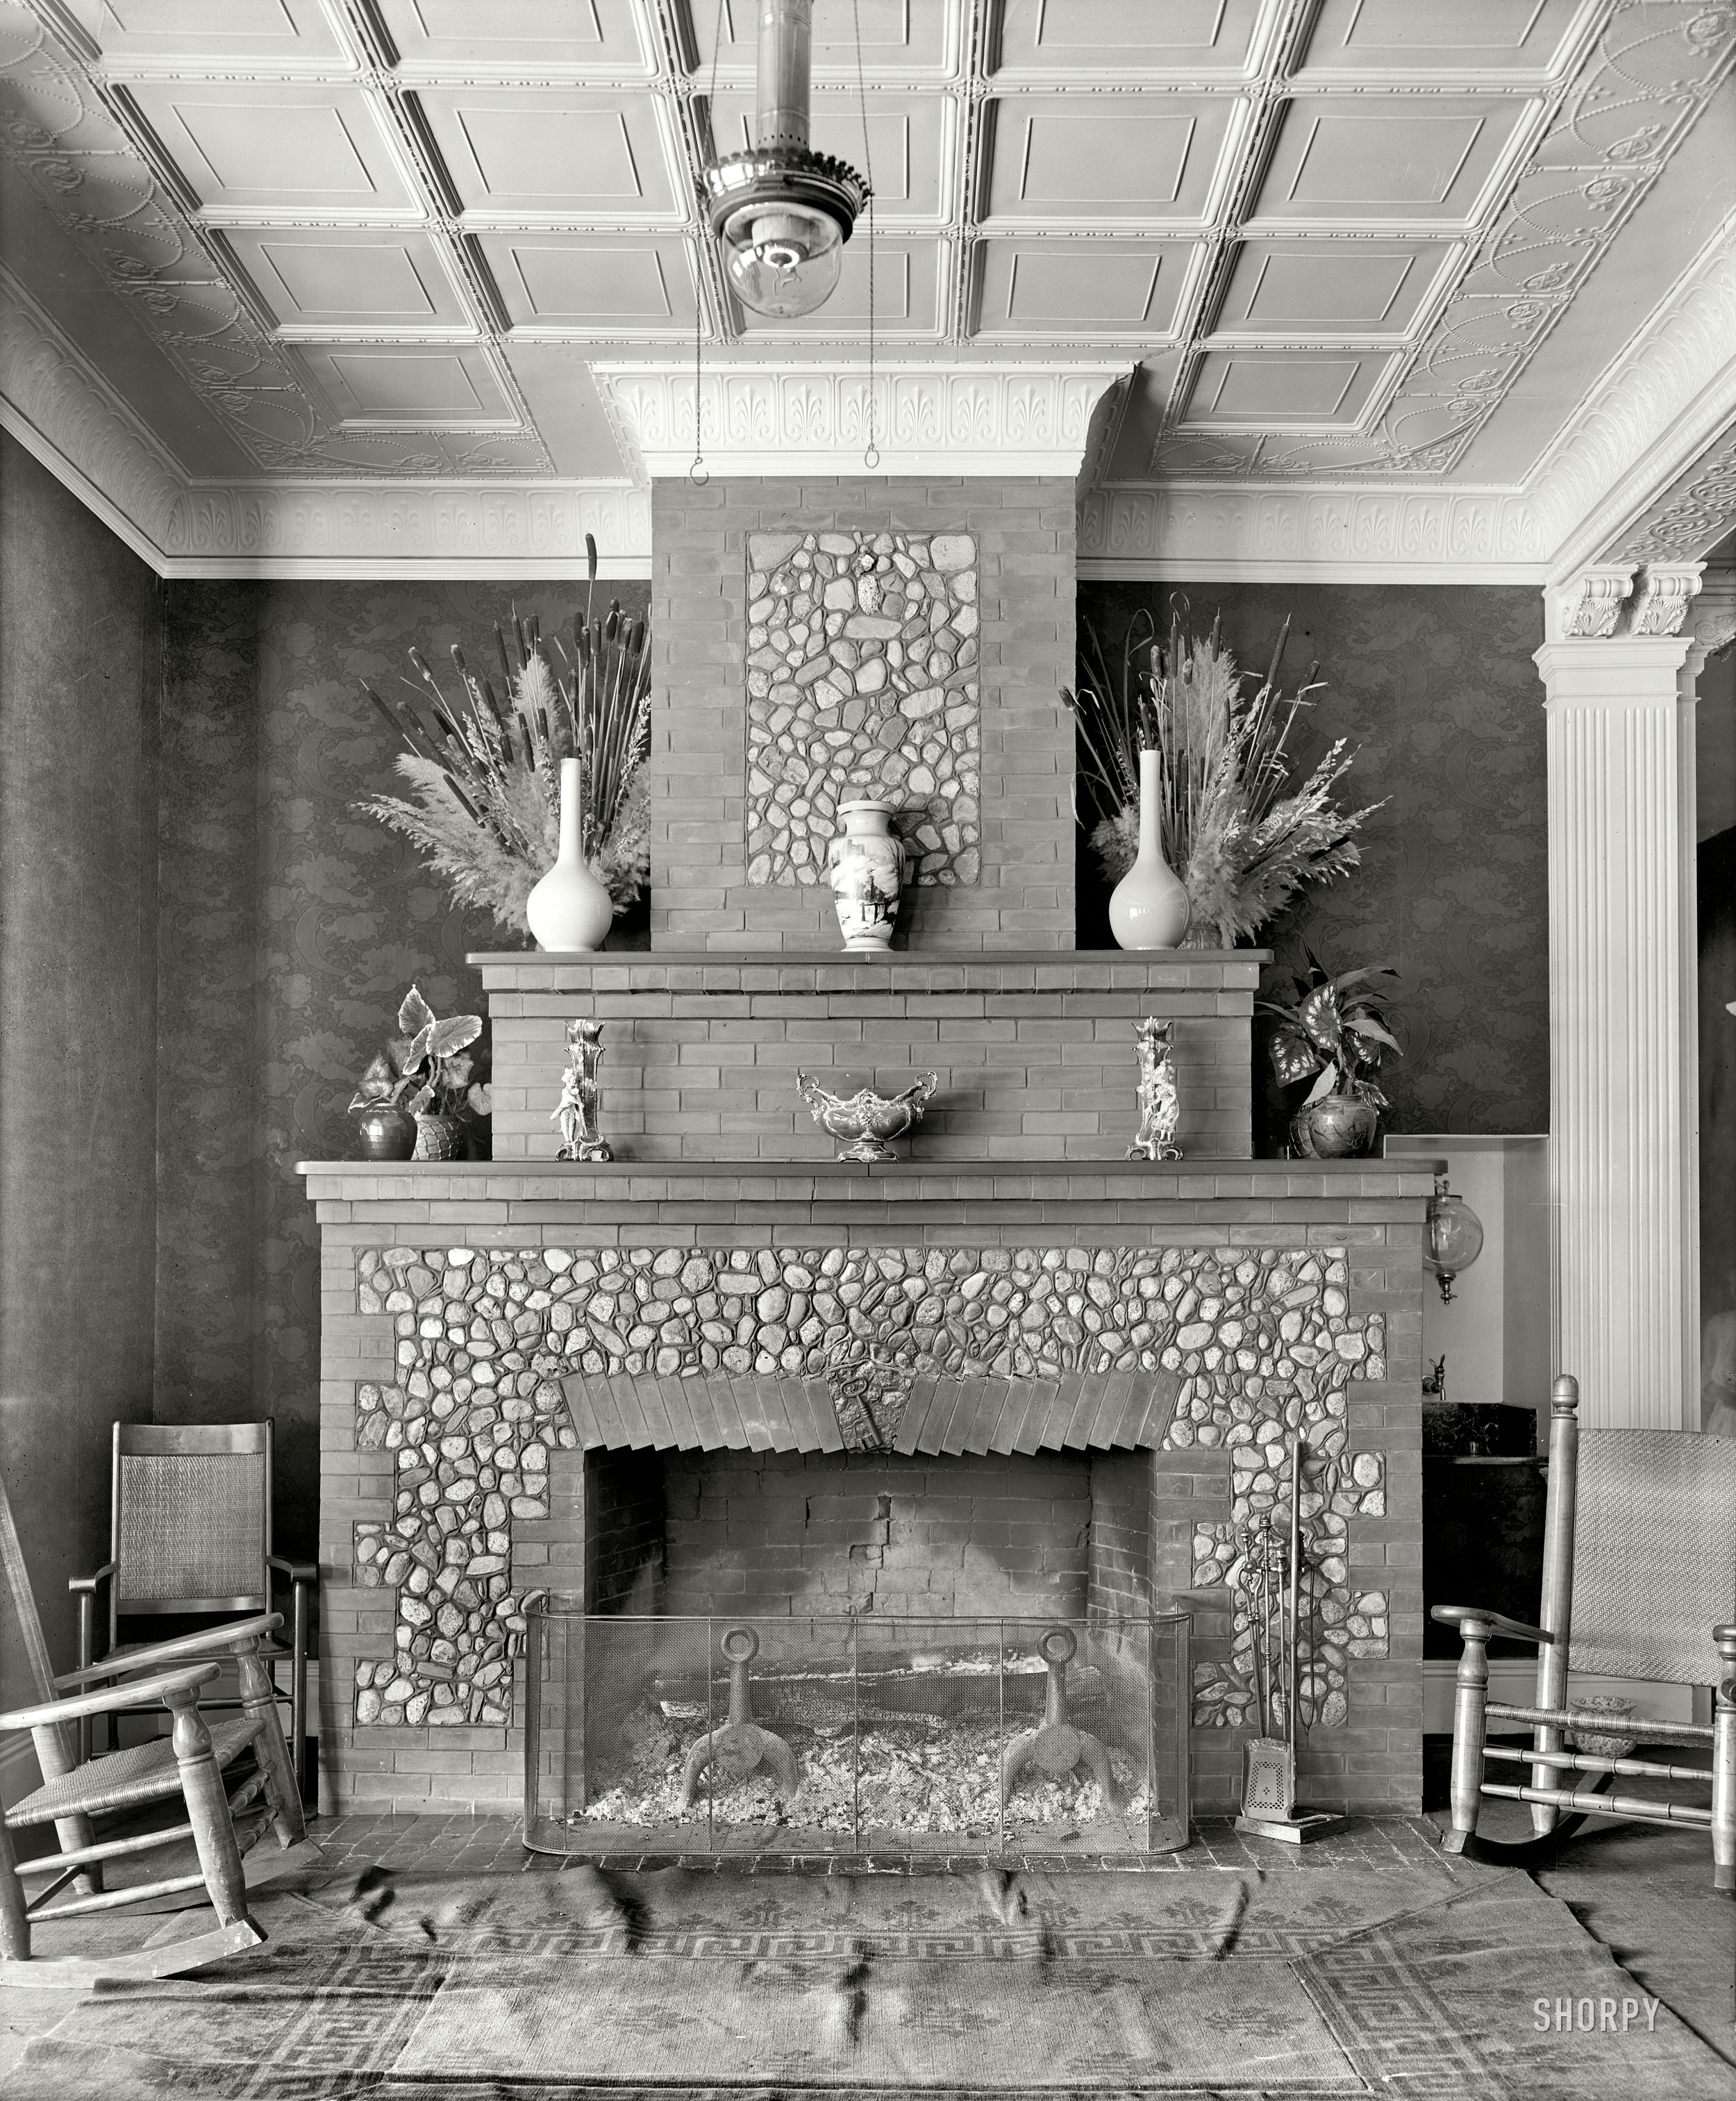 Crawford Notch, New Hampshire, circa 1906. "Fireplace, Crawford House." 8x10 inch dry plate glass negative, Detroit Publishing Company. View full size.